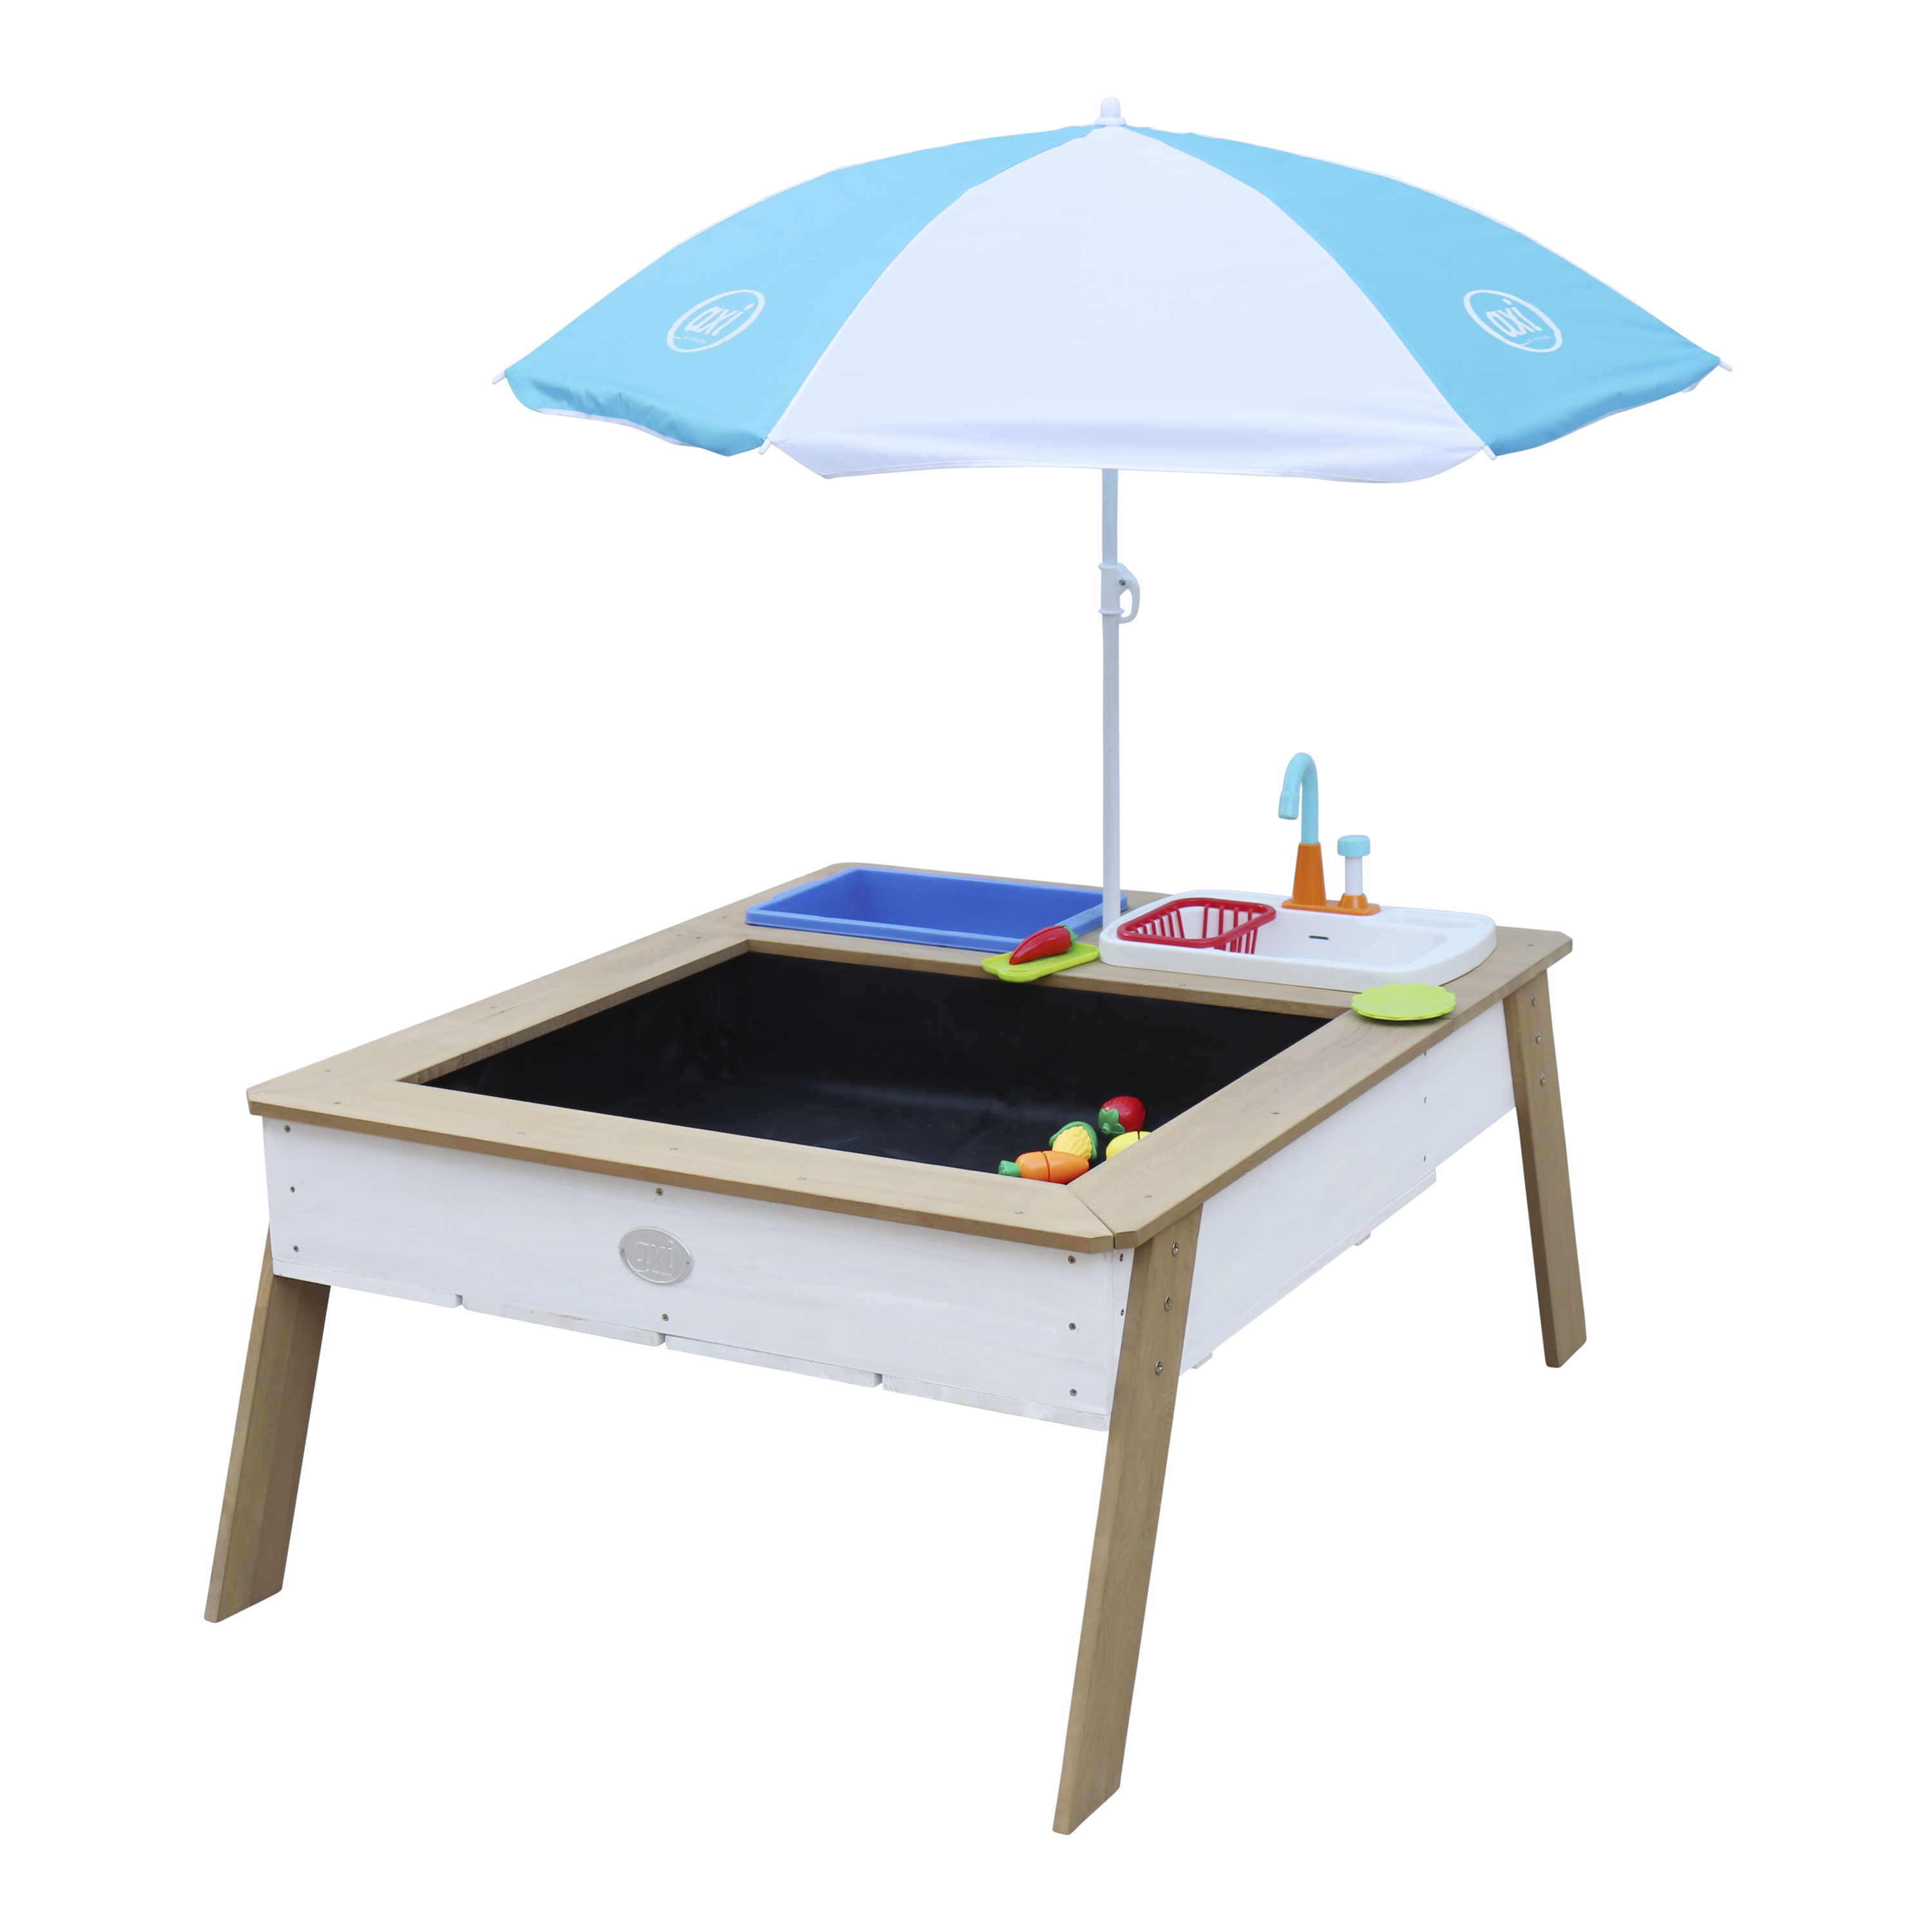 Linda Sand & Water Table with Play Kitchen sink Brown/White - Umbrella Blue/White